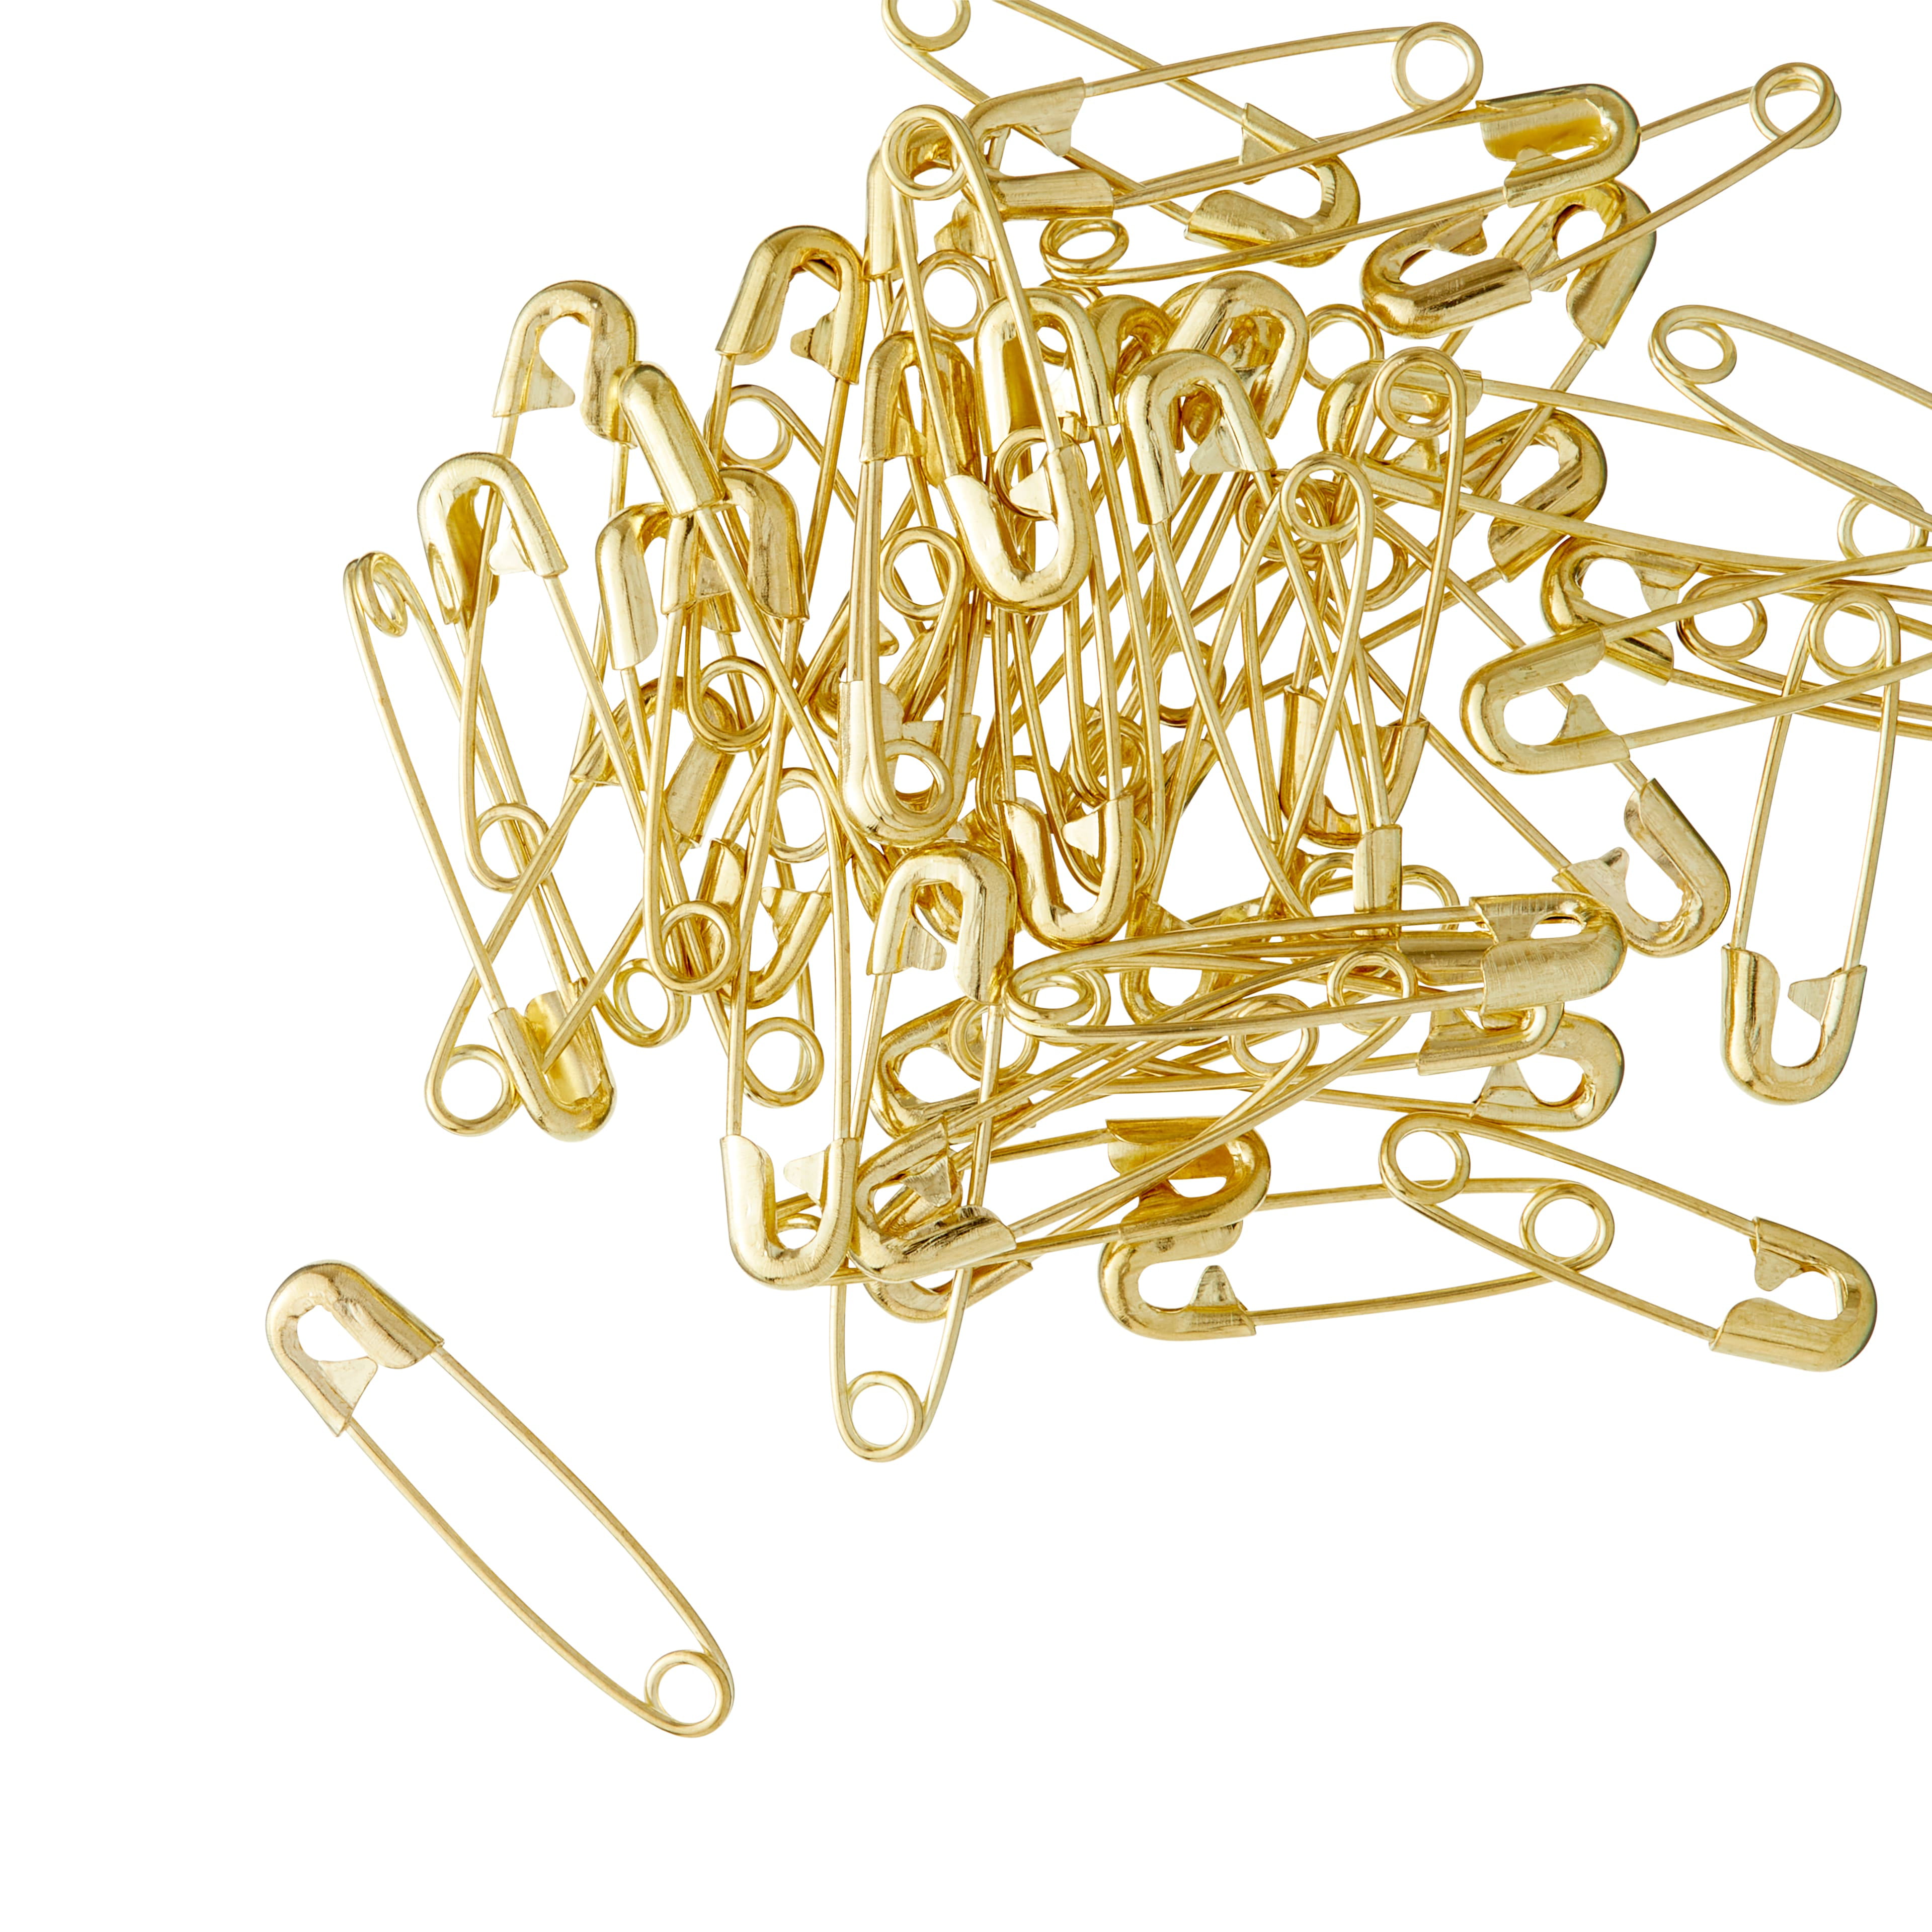 12 Packs: 50 ct. (600 total) Black Safety Pins by Loops & Threads™